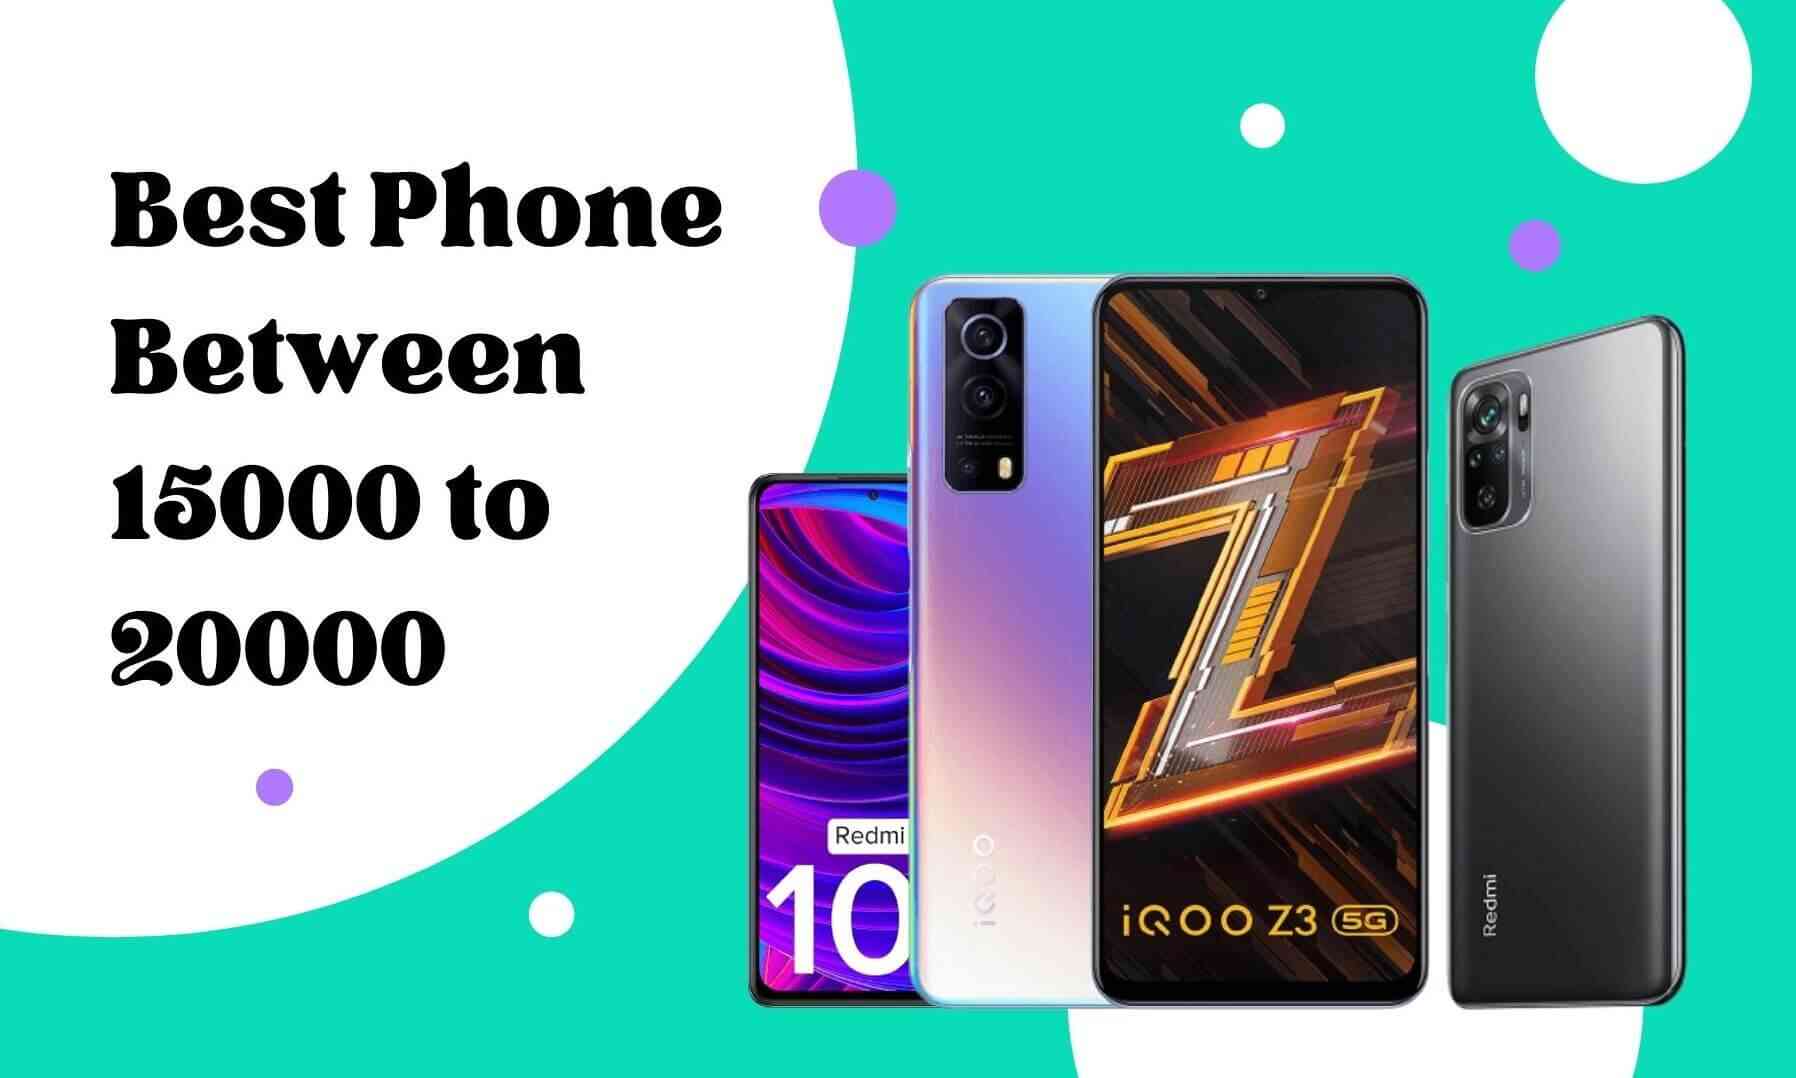 Which is the Best Phone Between 15000 to 20000